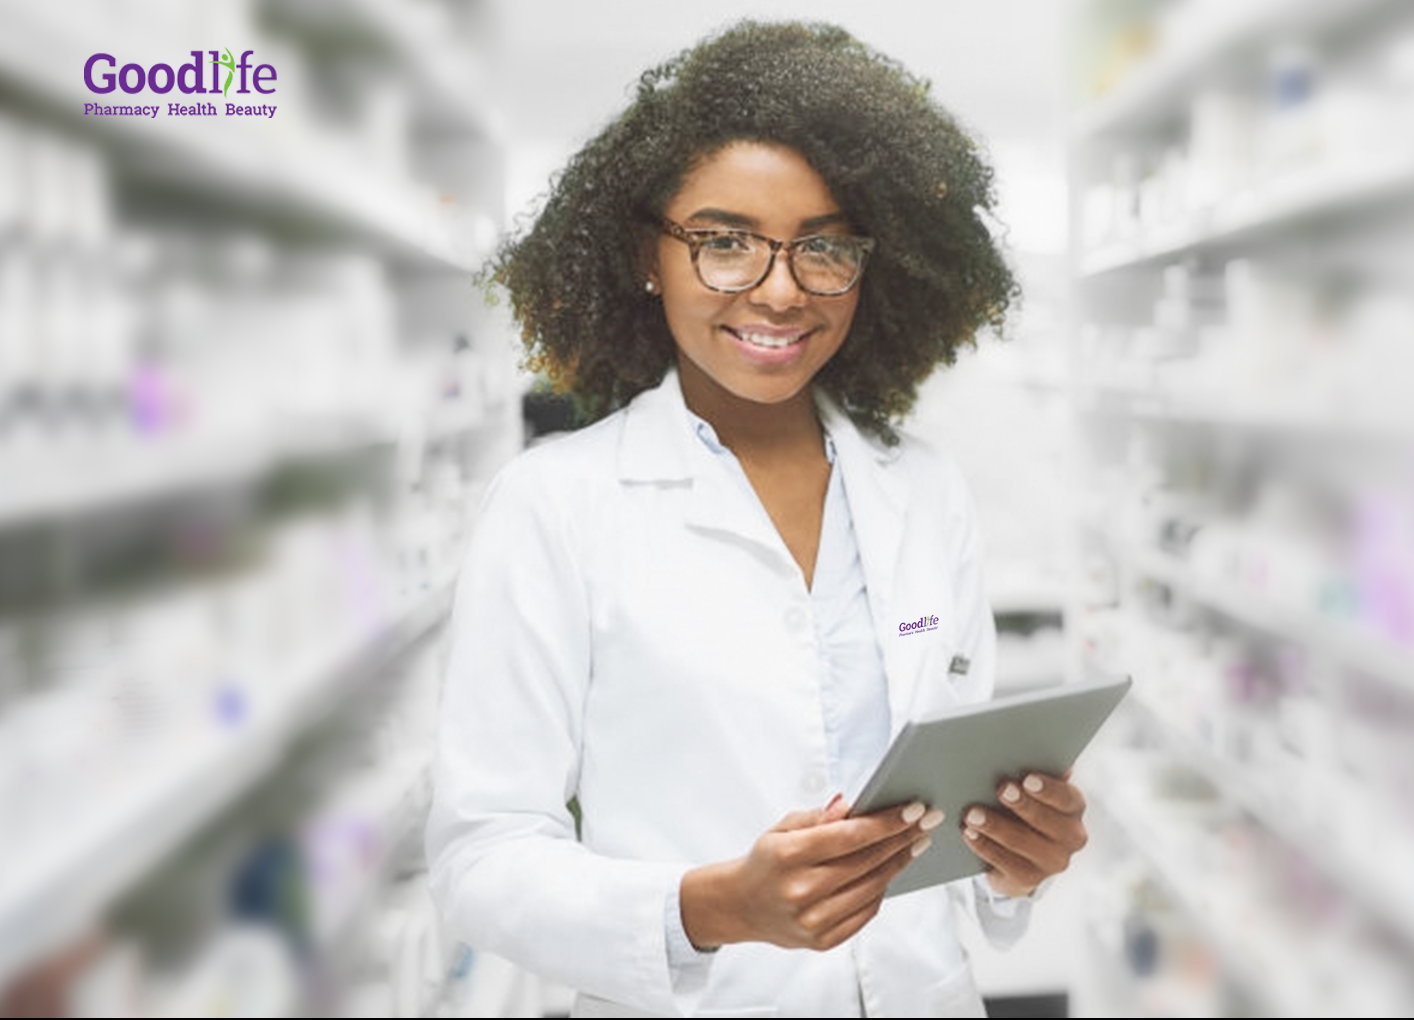 GOODLIFE PHARMACY: TAKING A STAND AGAINST FLU